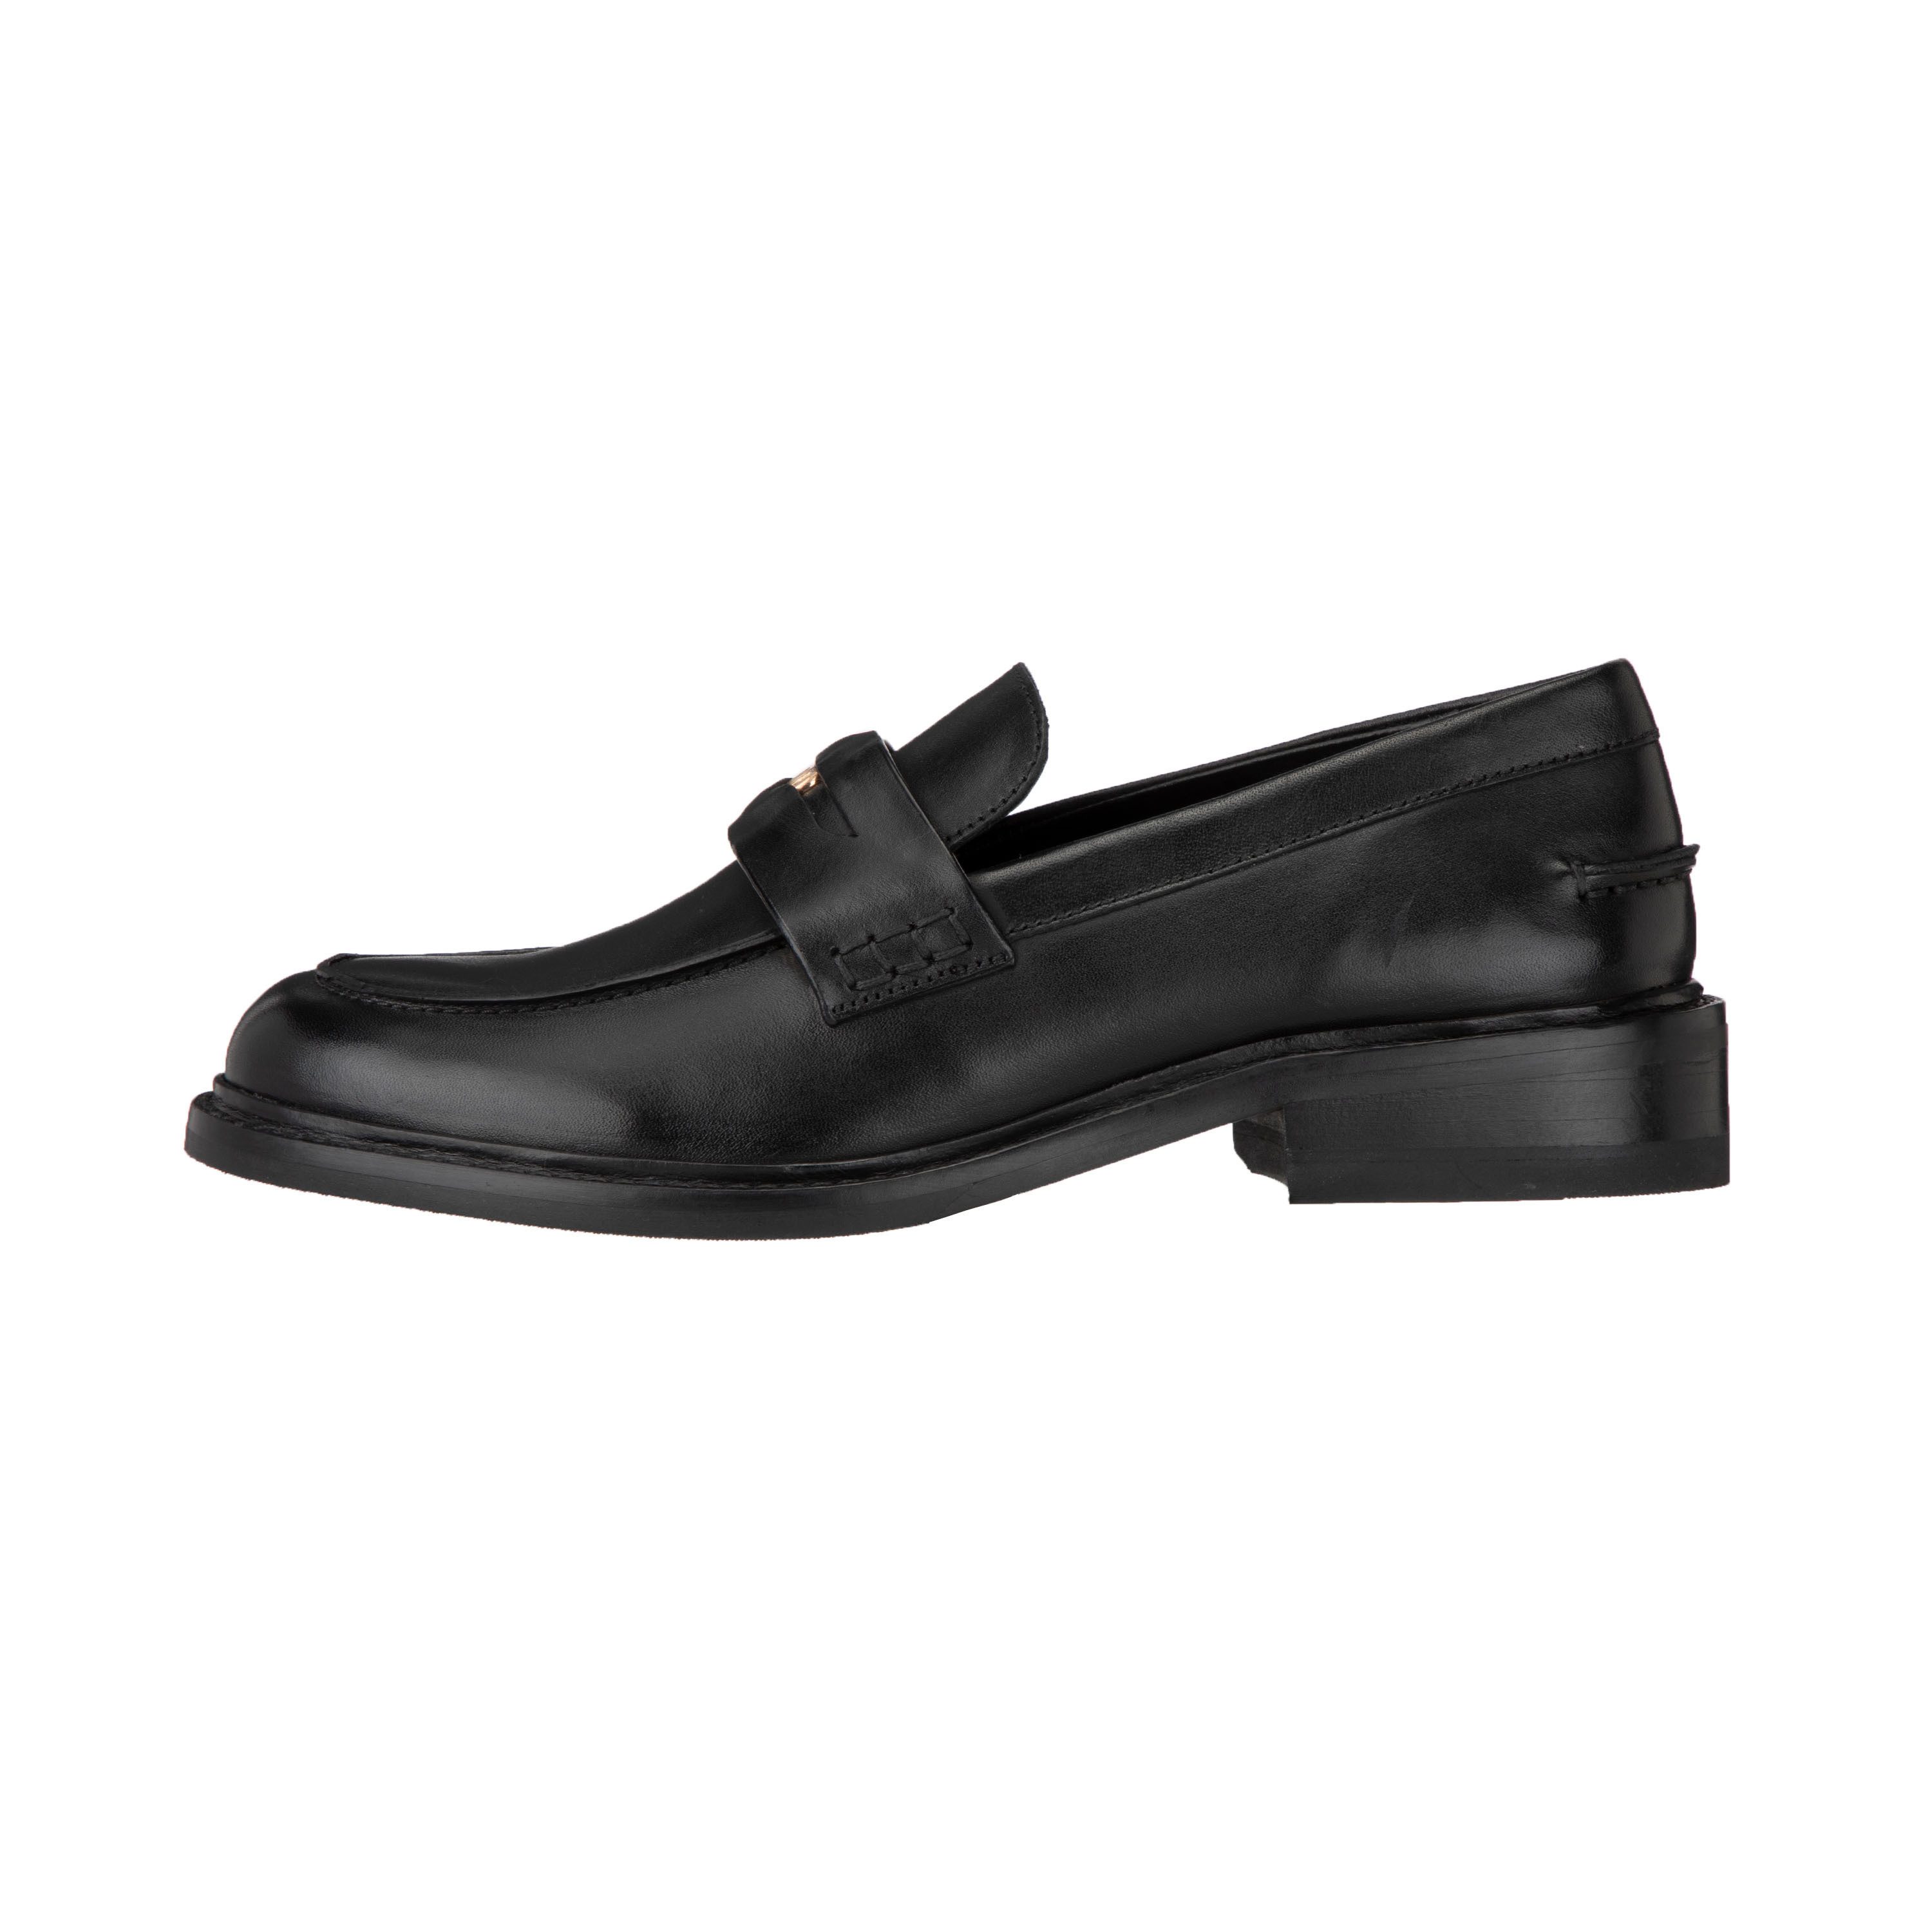 JOOP! Slipper outer: cow leather, inner: cow leather